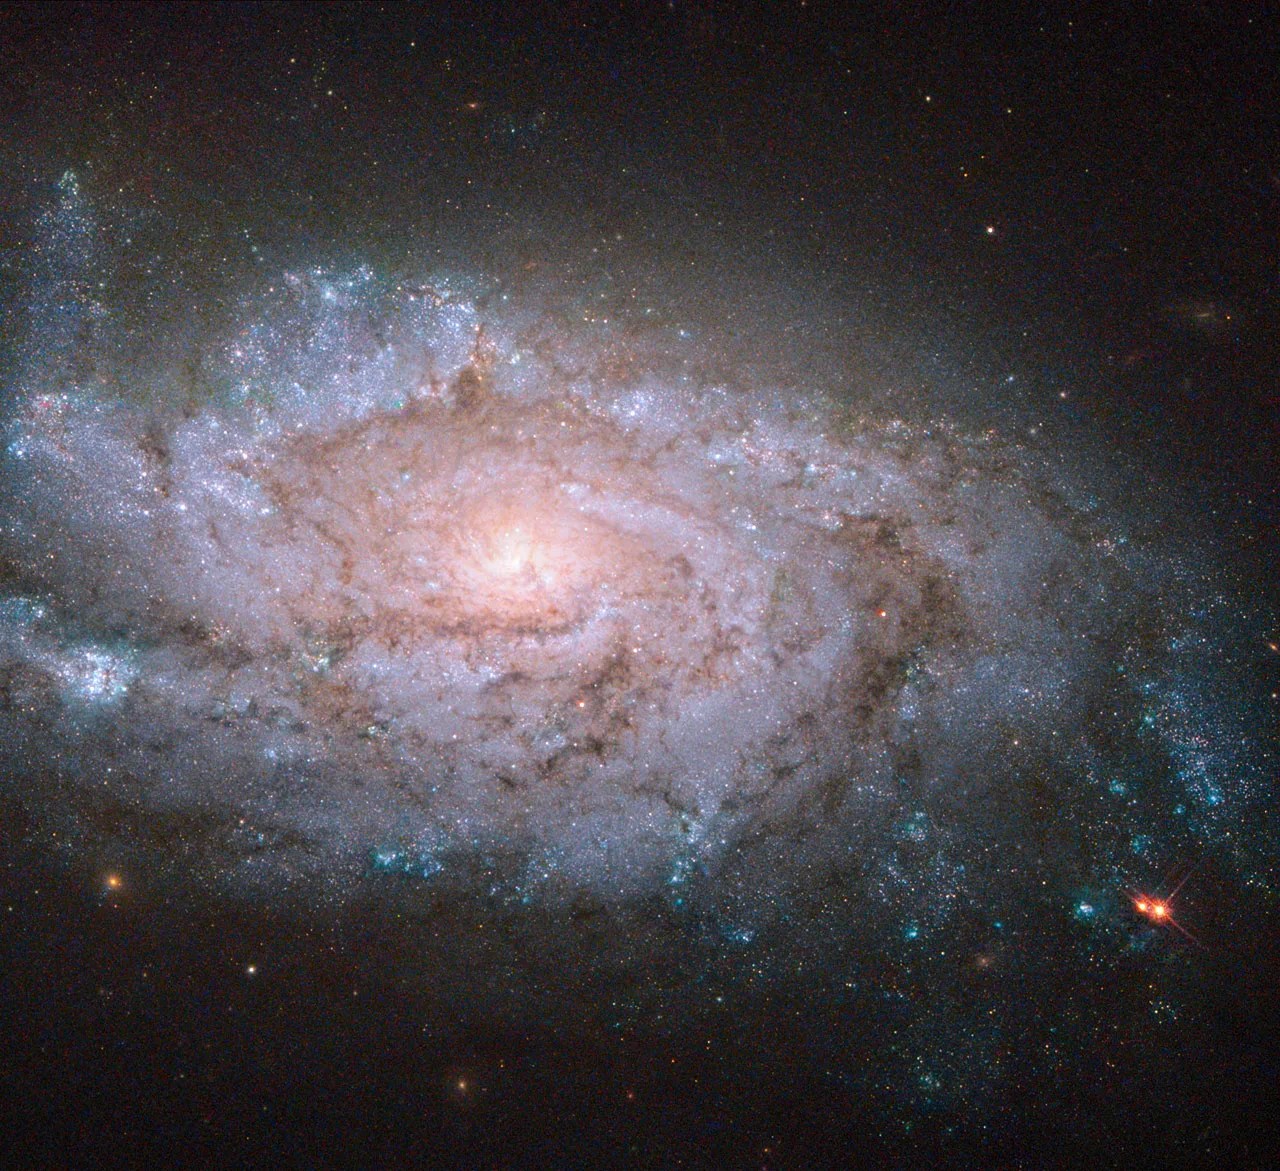 A spiral galaxy shaped a bit like a starfish, with a pink-orange center, surrounding arms and clouds of pinkish stars and reddish brown dust, and blue-white stars at the edges.